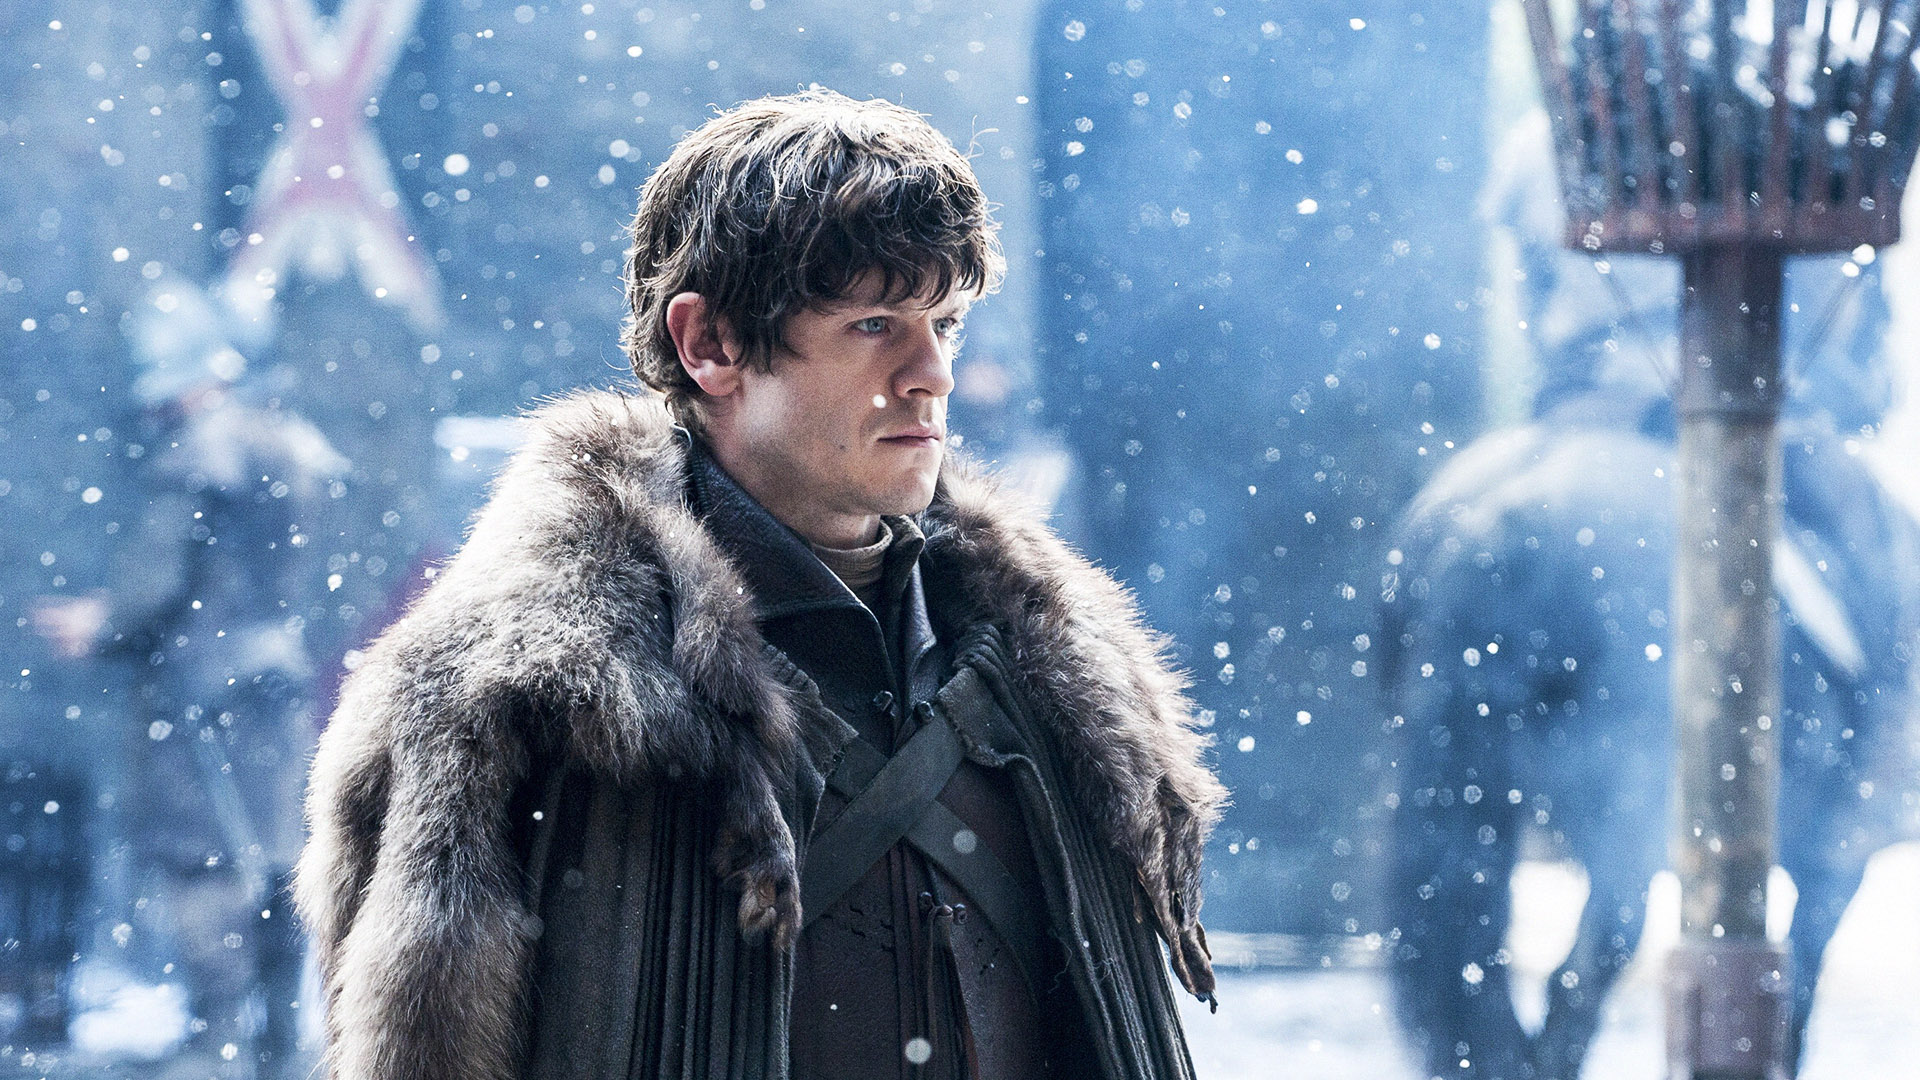 Iwan Rheon Lost Out on a GoT Role That Could've Earned Him $12 Million